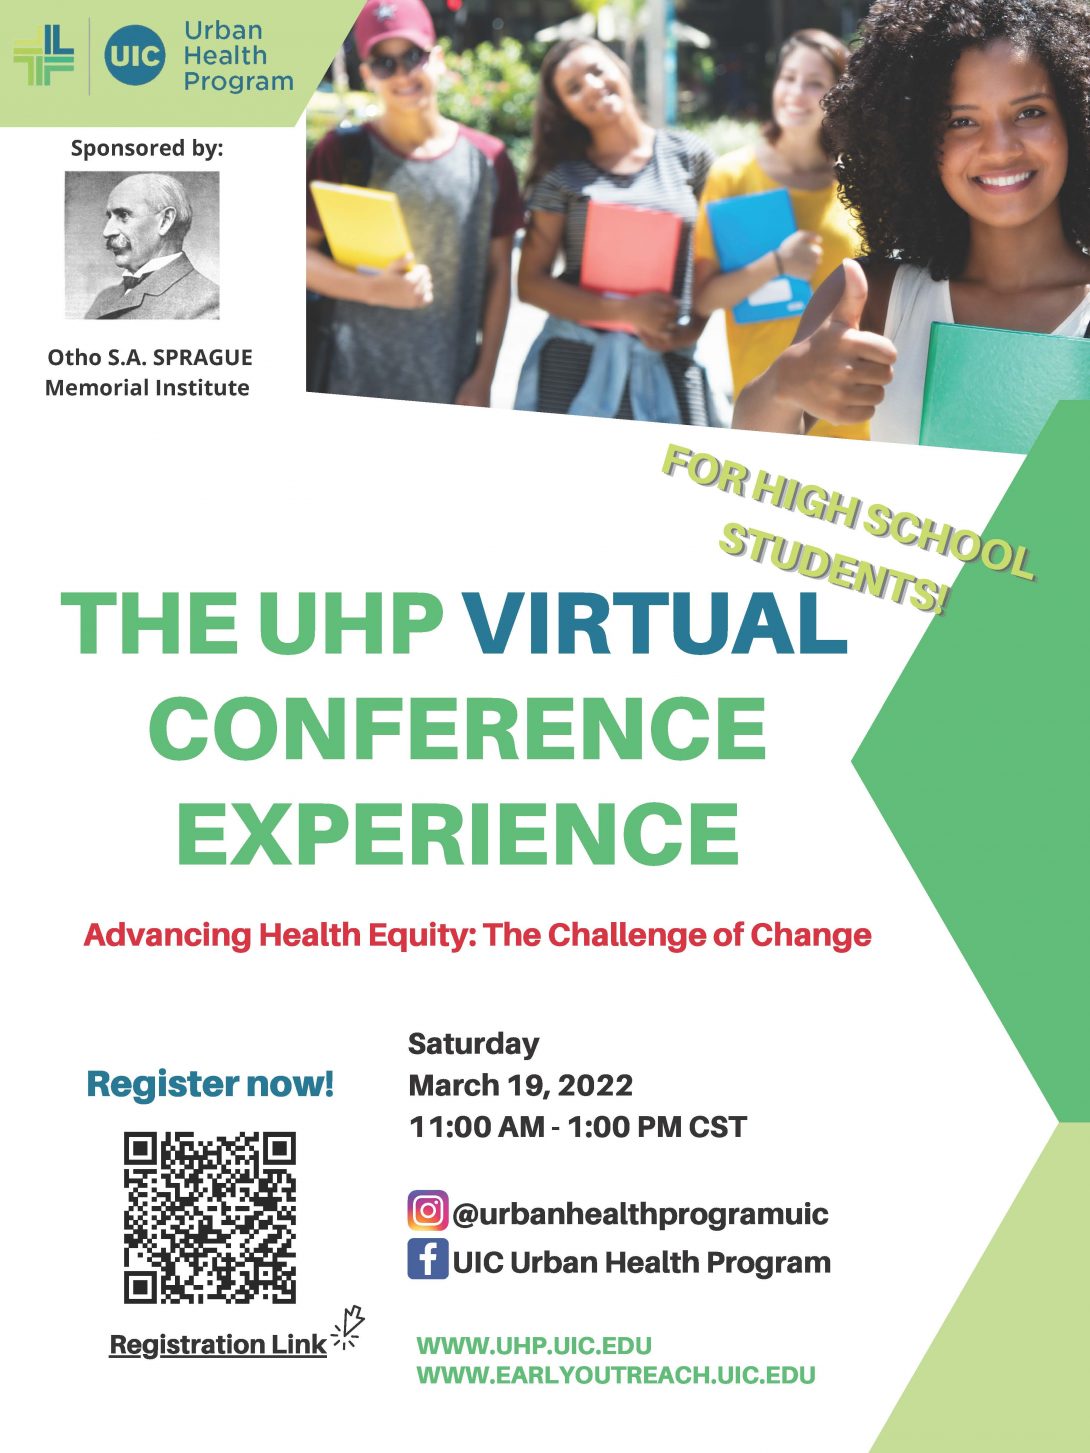 image of event flyer using greens and blues with photo of diverse conference goers, and the text 